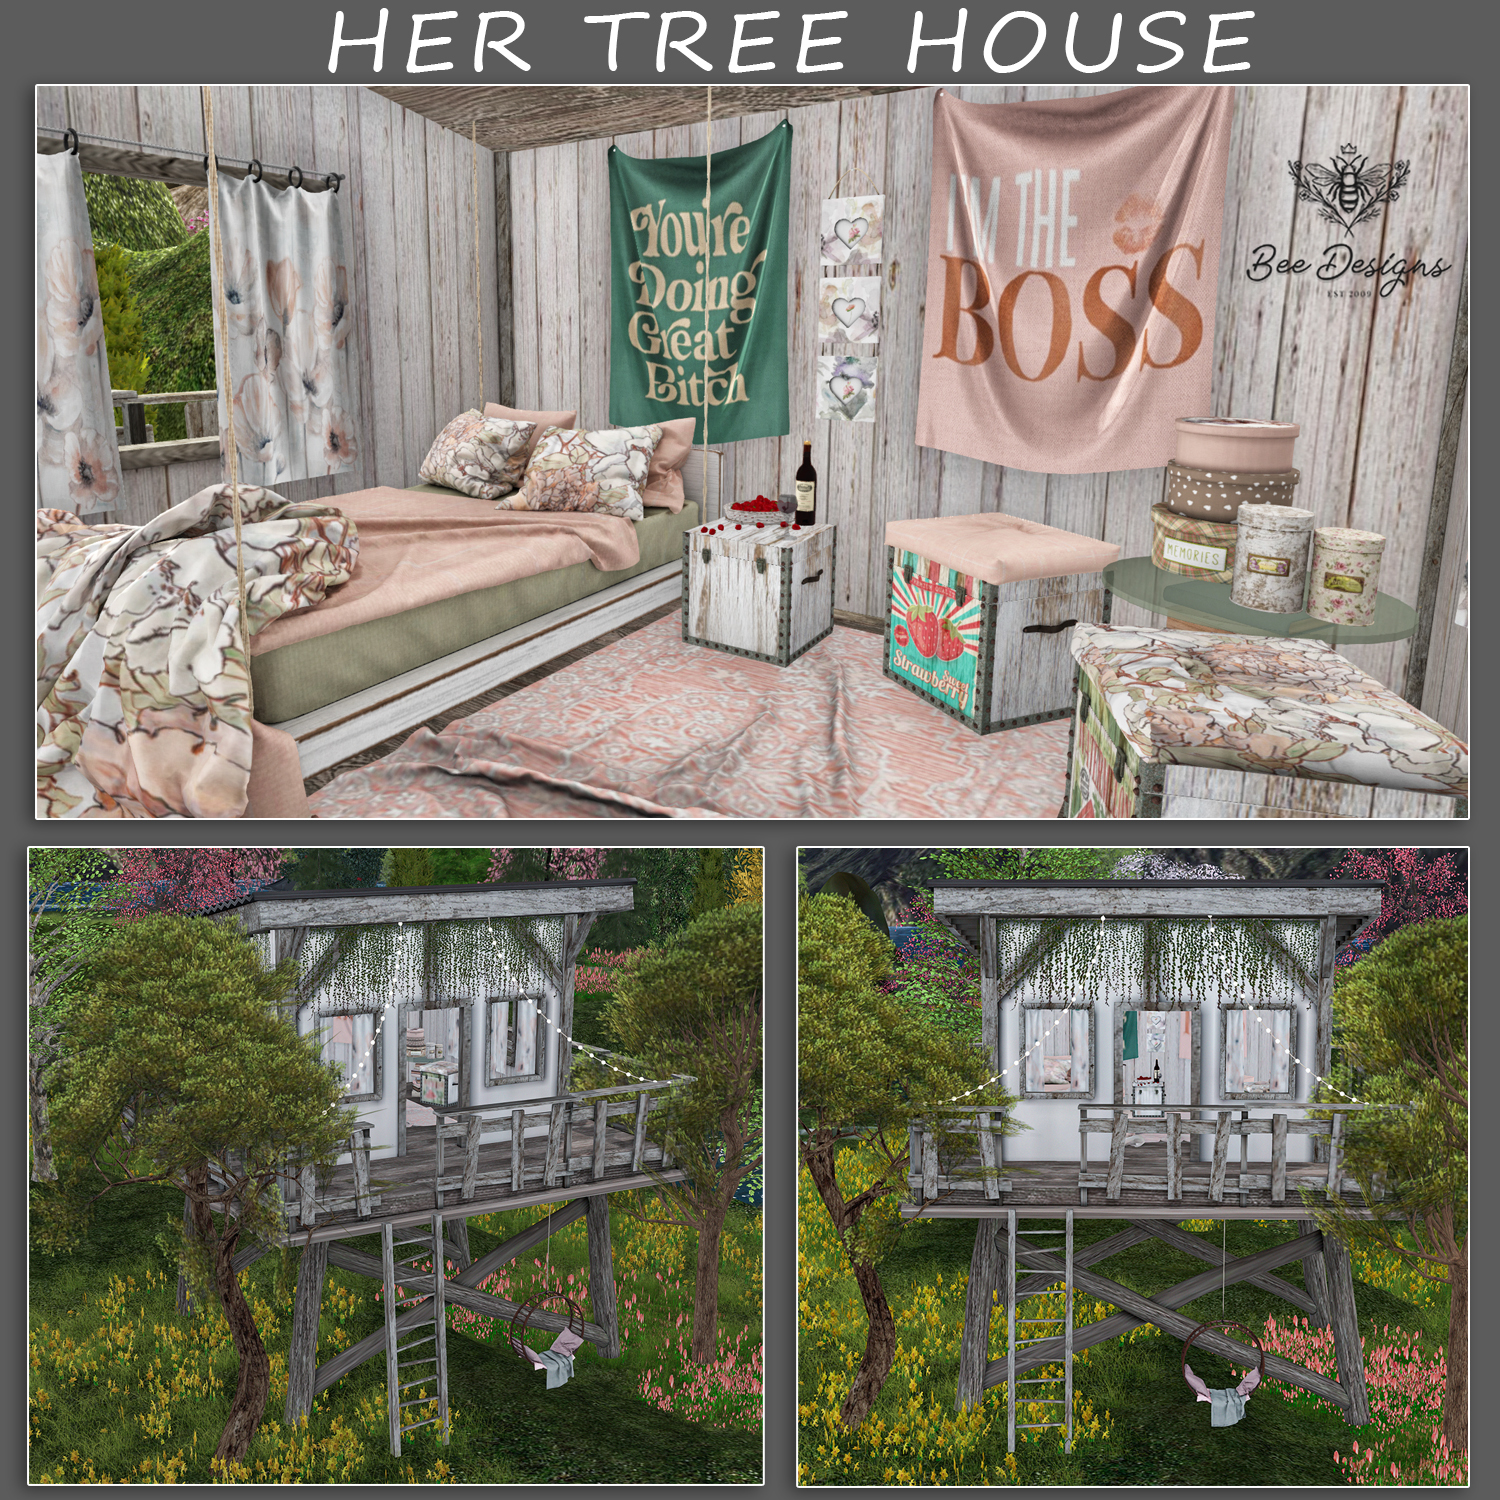 Bee Designs – Her Tree House